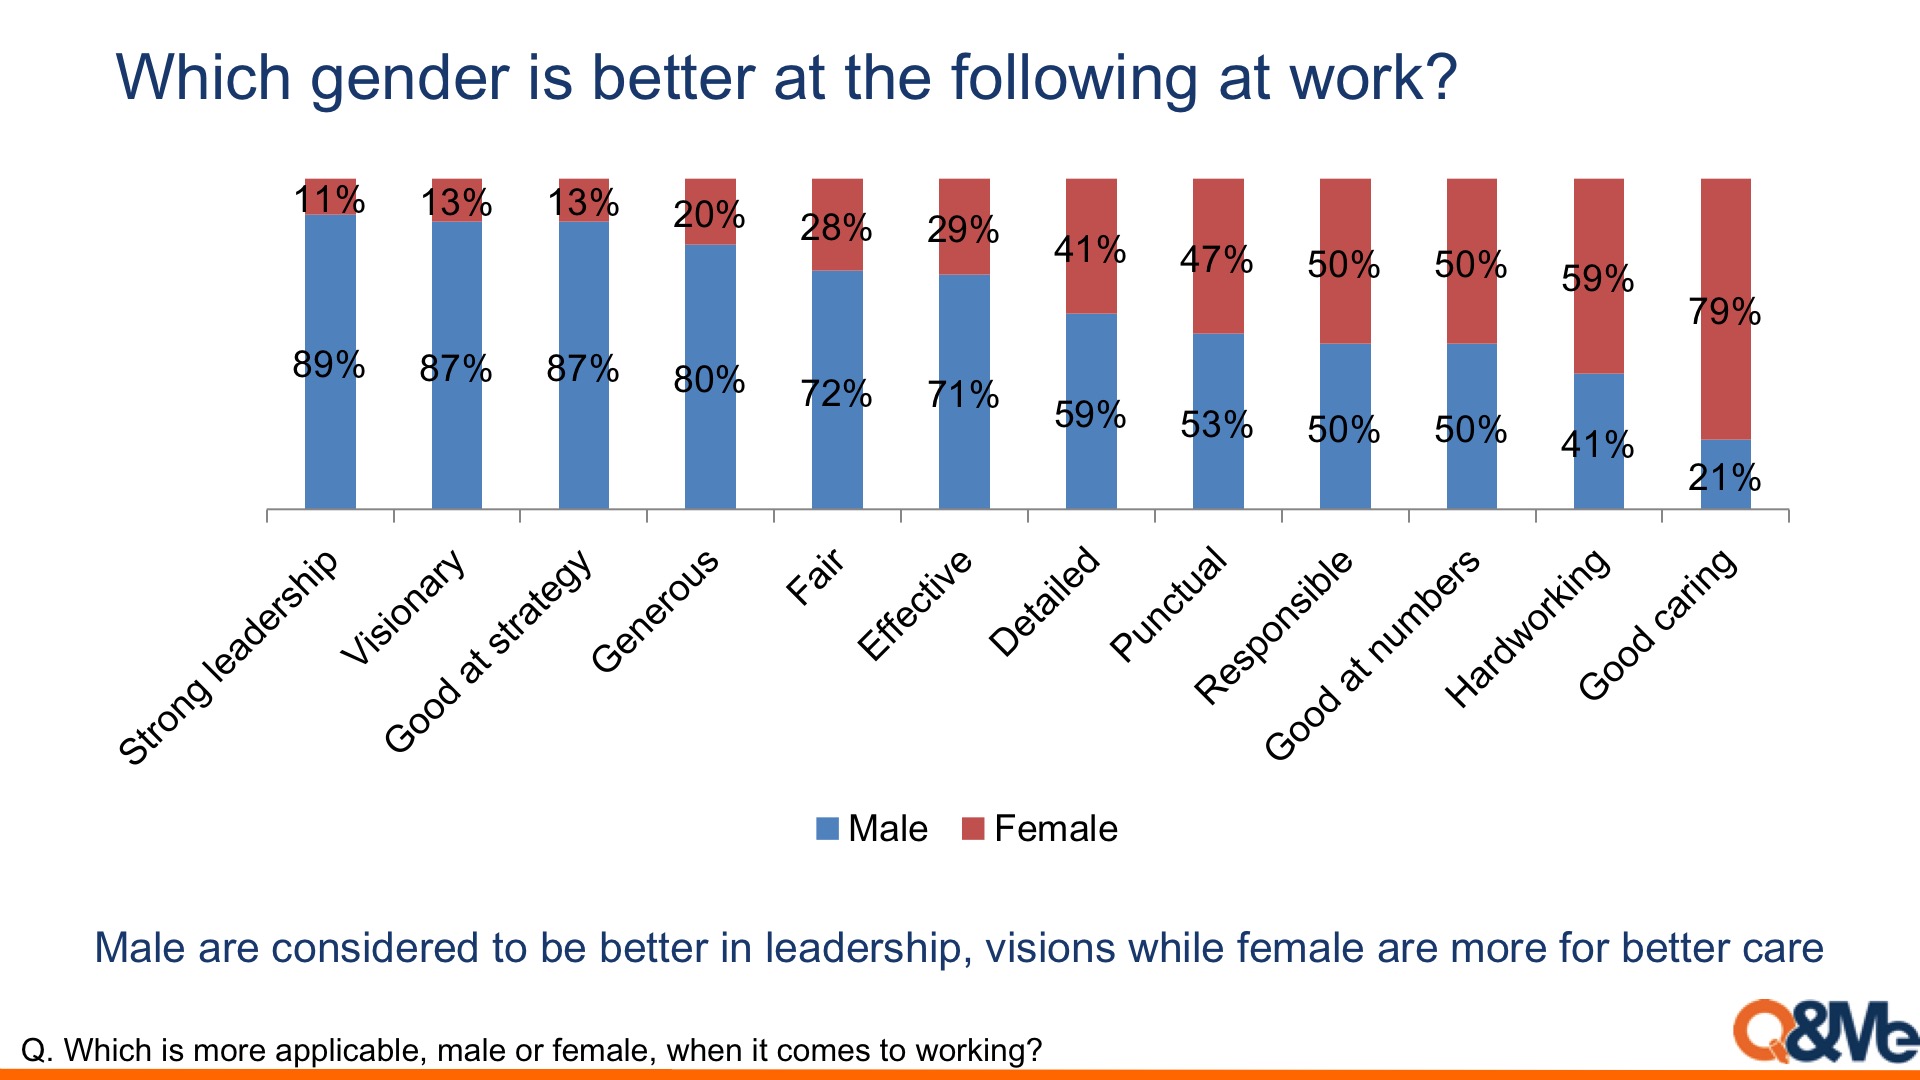 Work abilities evaluation between male and female